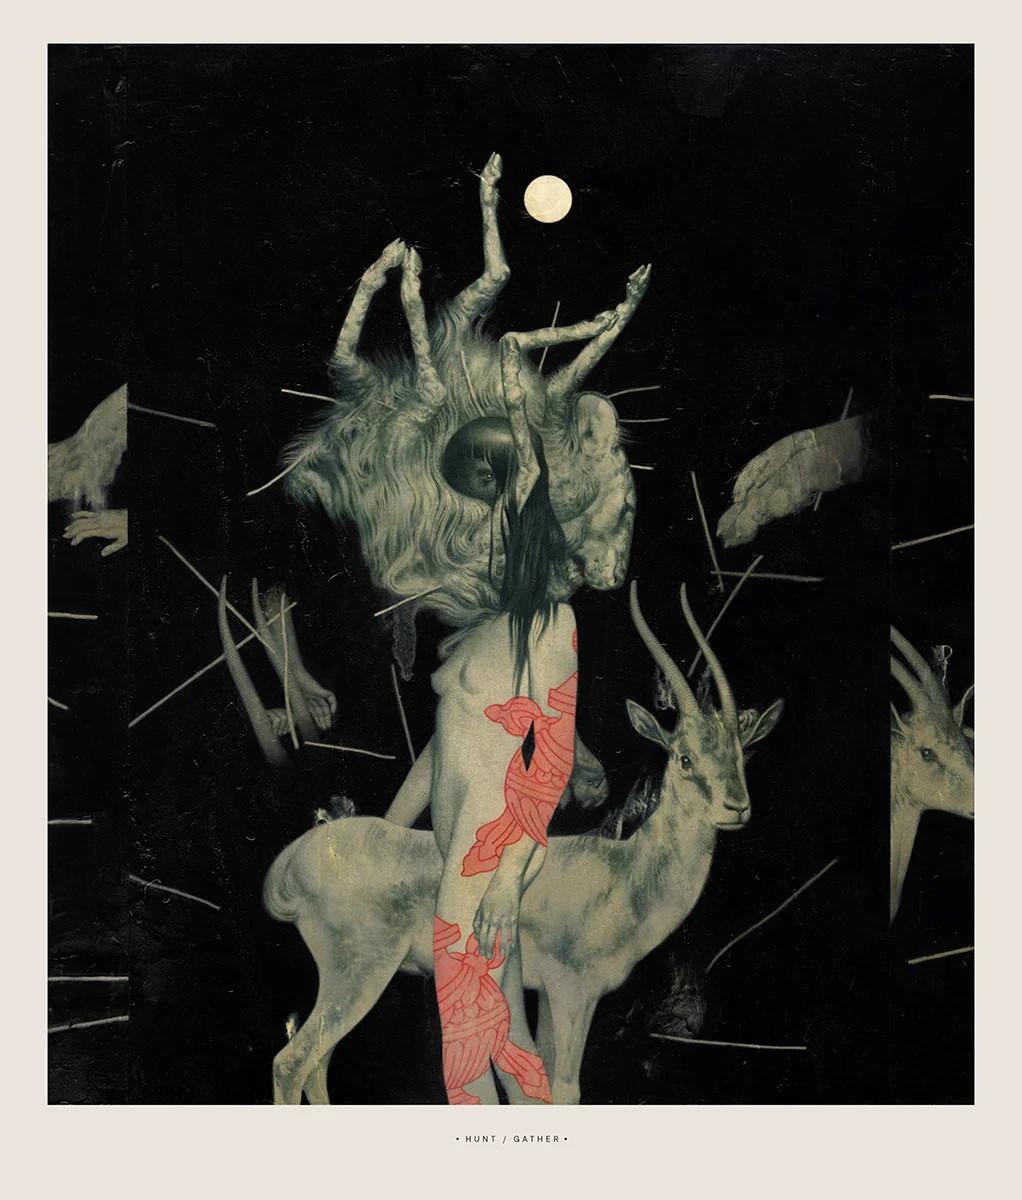 Joao Ruas Abstract Print - Hunt Gather Signed and Numbered Print Macabre Illustration 